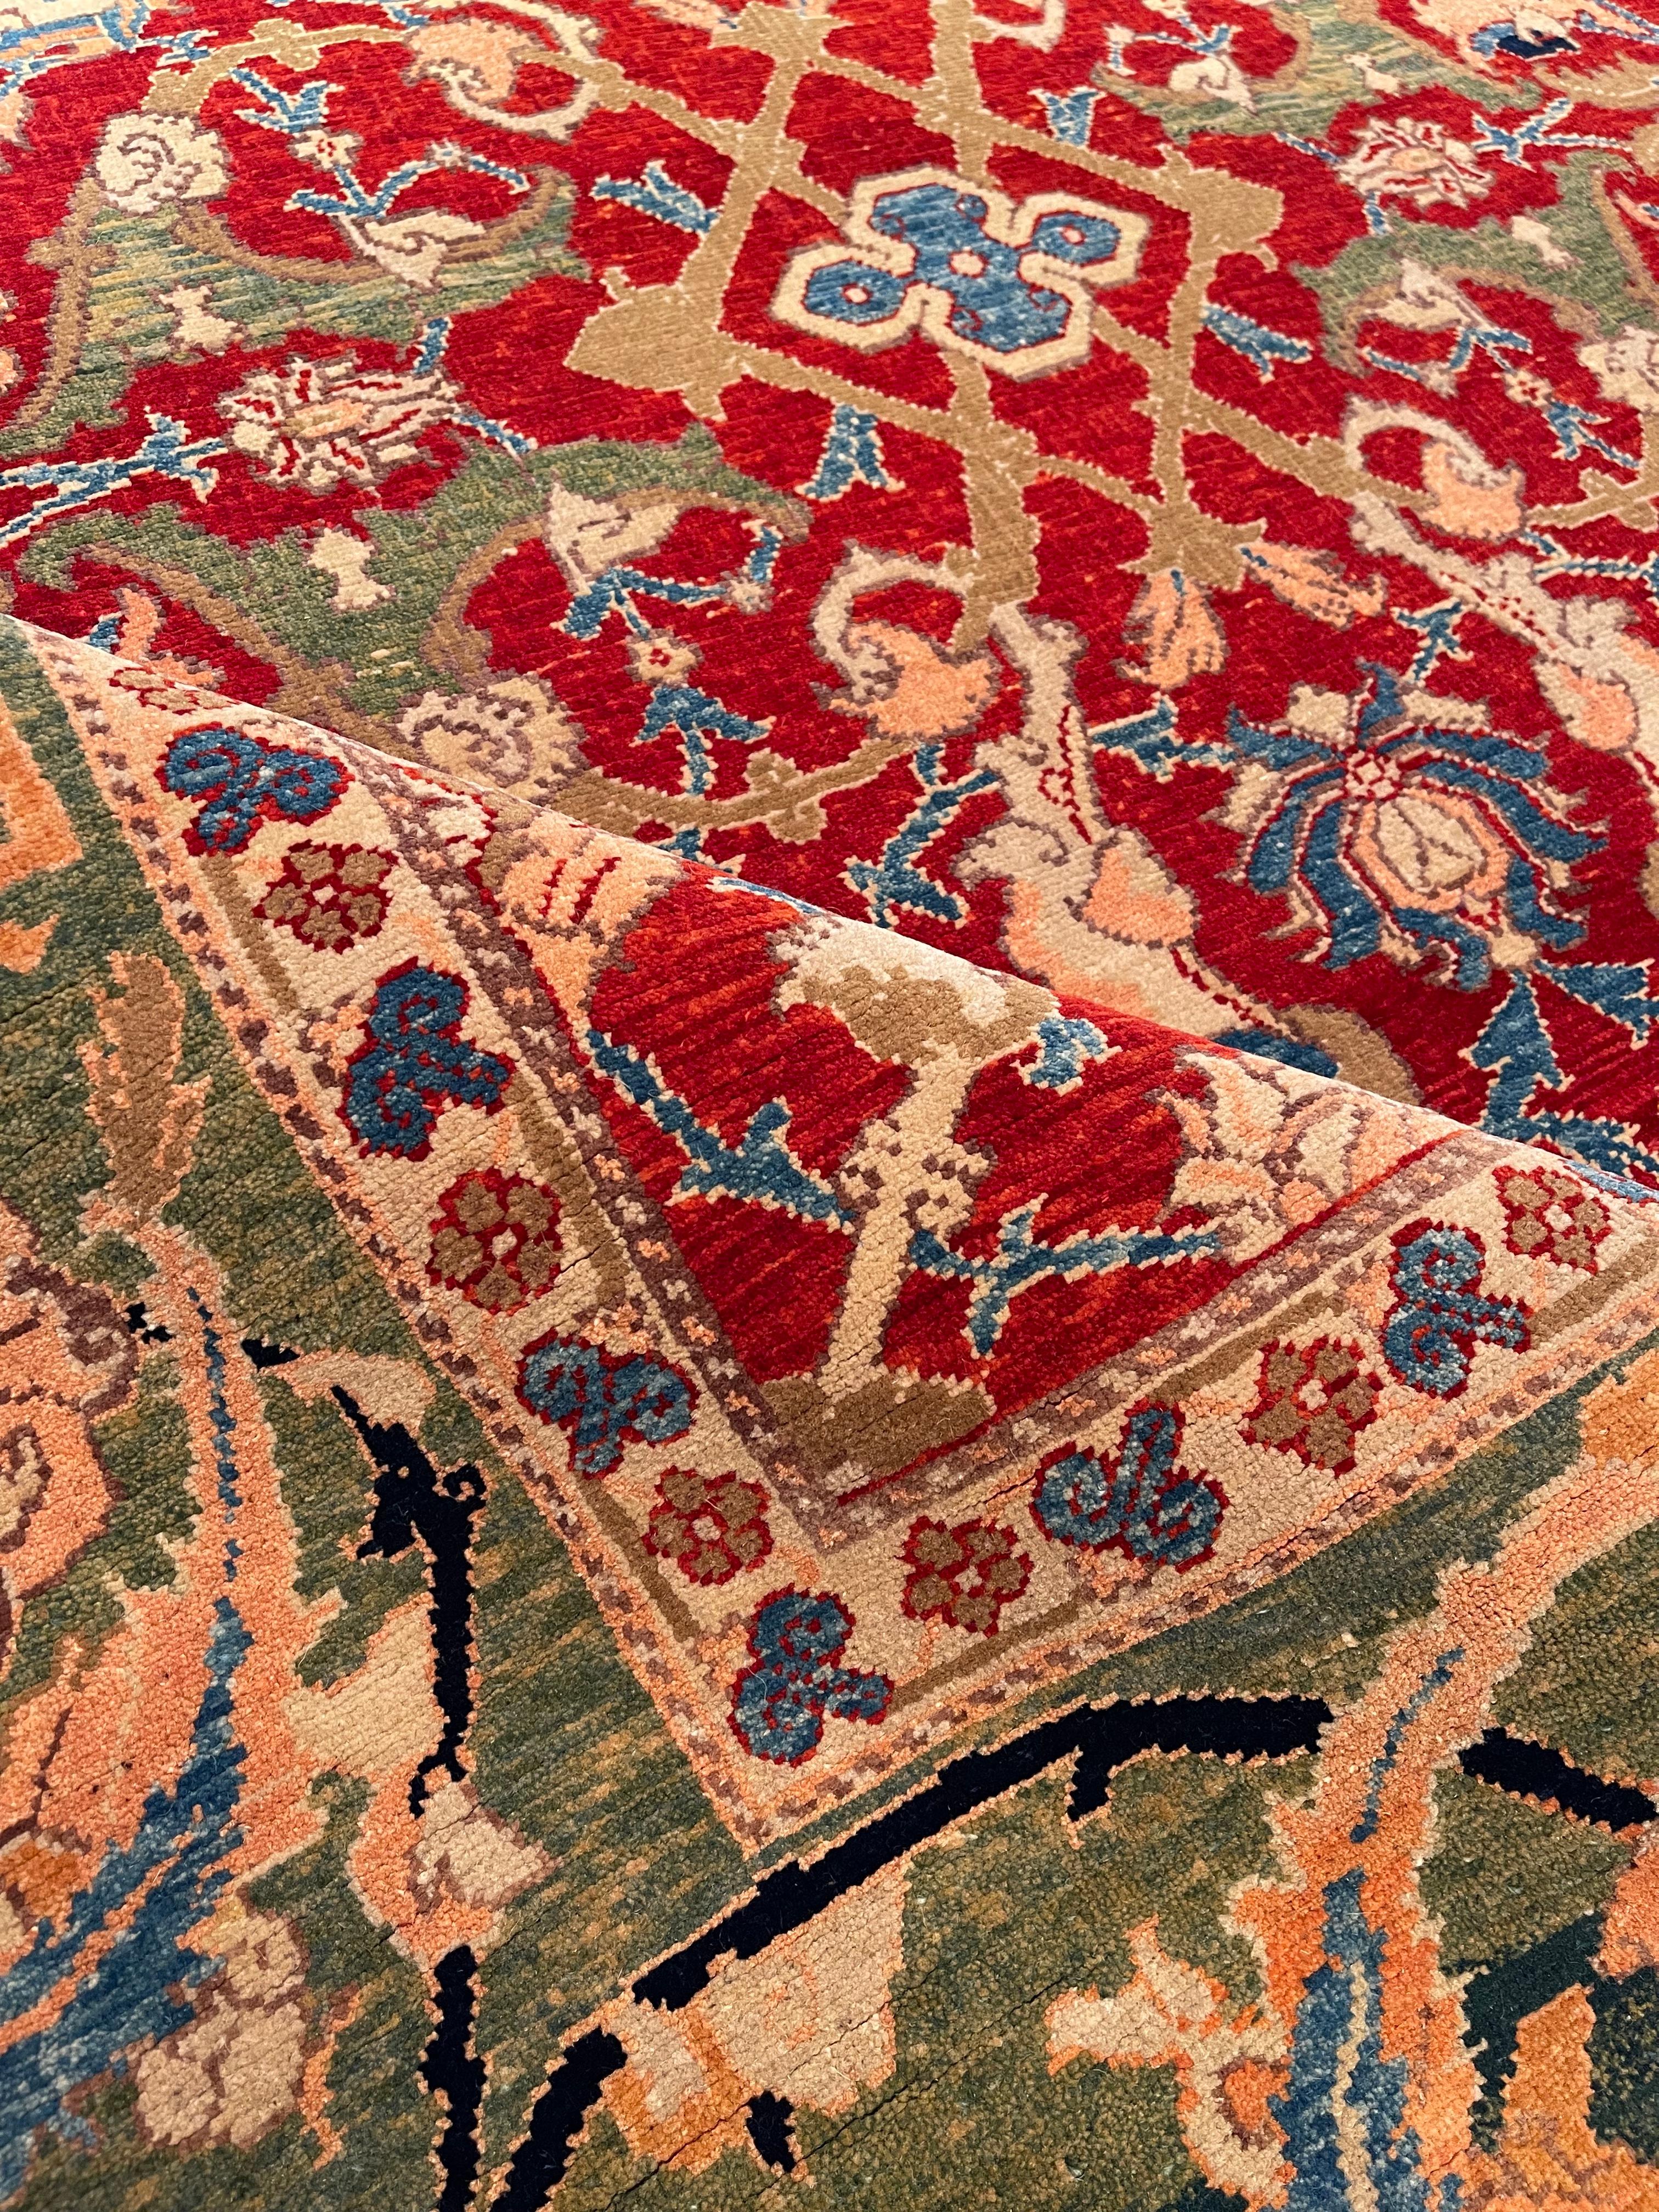 The source of the carpet comes from the book 'Oriental Rugs in the Metropolitan Museum of Art, by Dimand, Maurice S., and Jean Mailey, The Metropolitan Museum of Art, New York 1973 fig.90.' 
If the so-called vase-technique carpets represented the